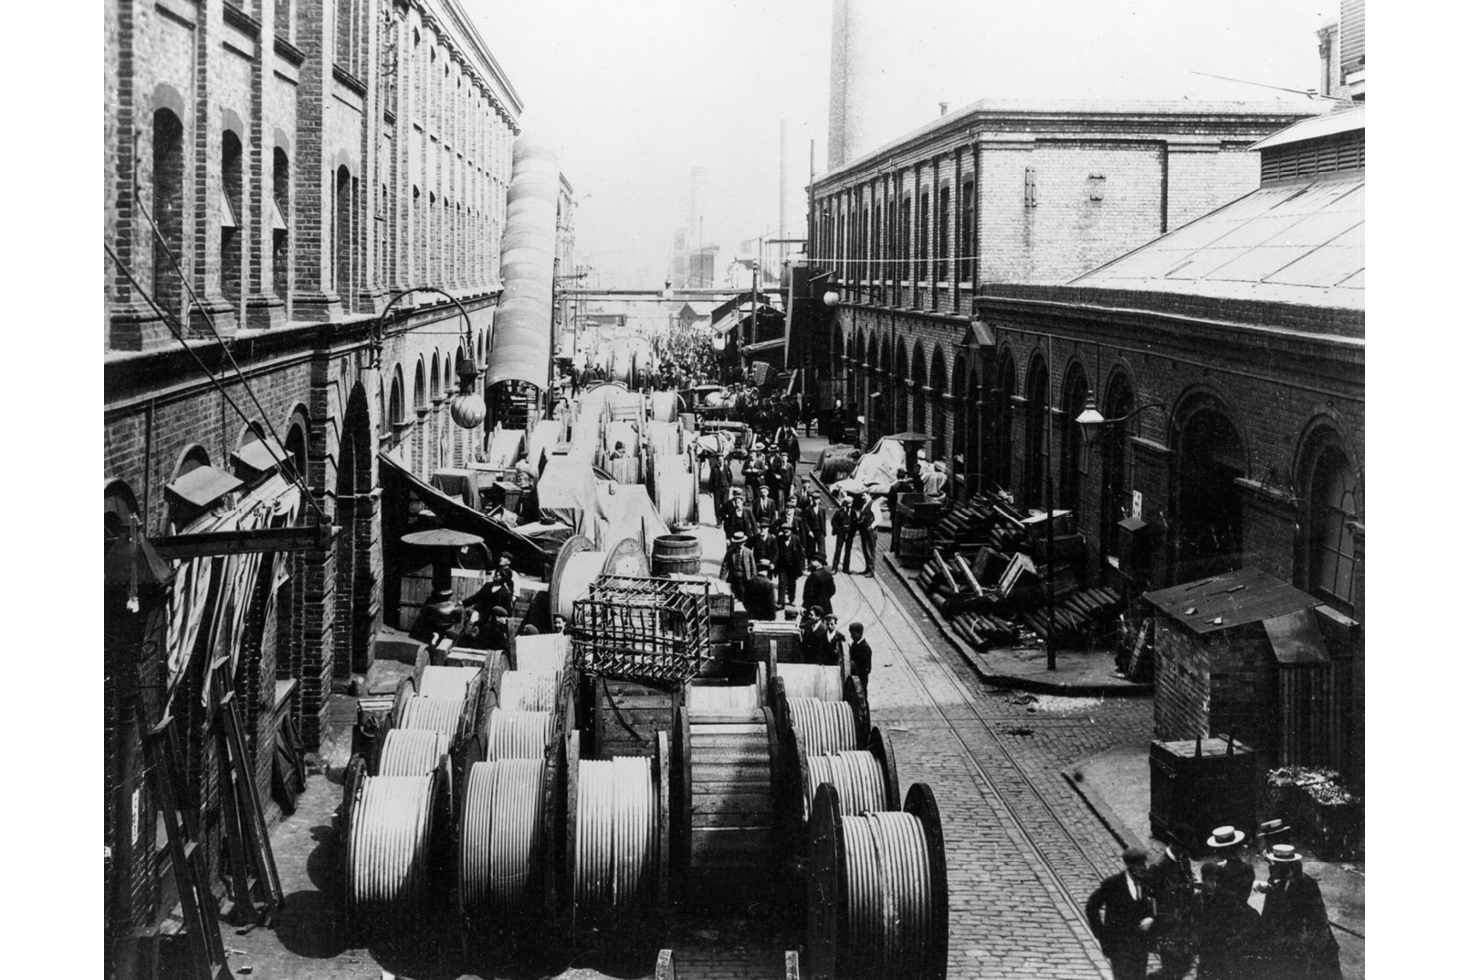 A black and white photograph of Siemens Brothers Ltd., Woolwich Works near London ca 1890: shows a cobbled street outside of an industrial building filled with wrapped cable lines; various men in suits make their way through the streets as they chat and observe the lines.